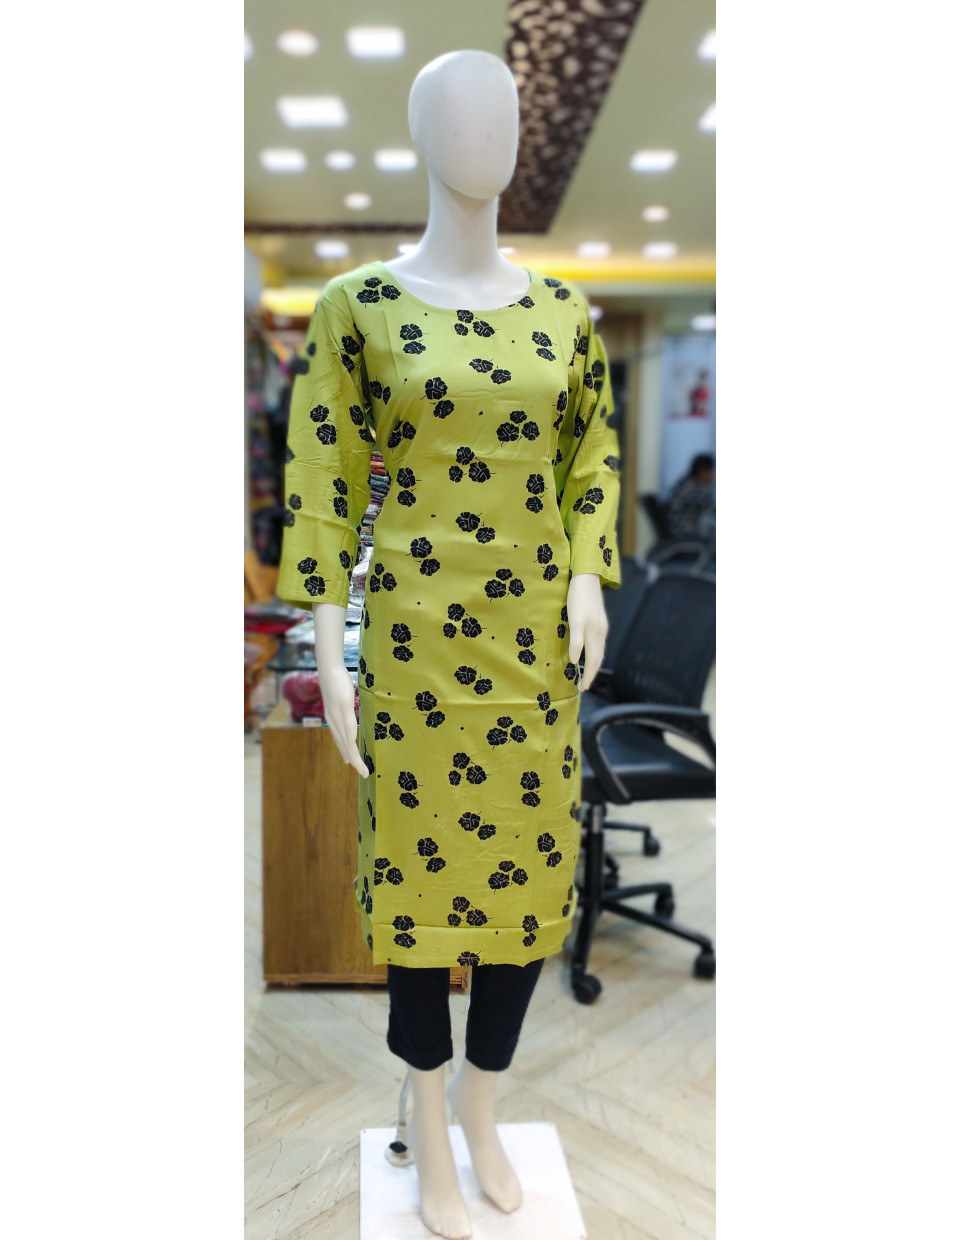 All Over Printed Rayon Kurti With Sequin Work (KR1886)